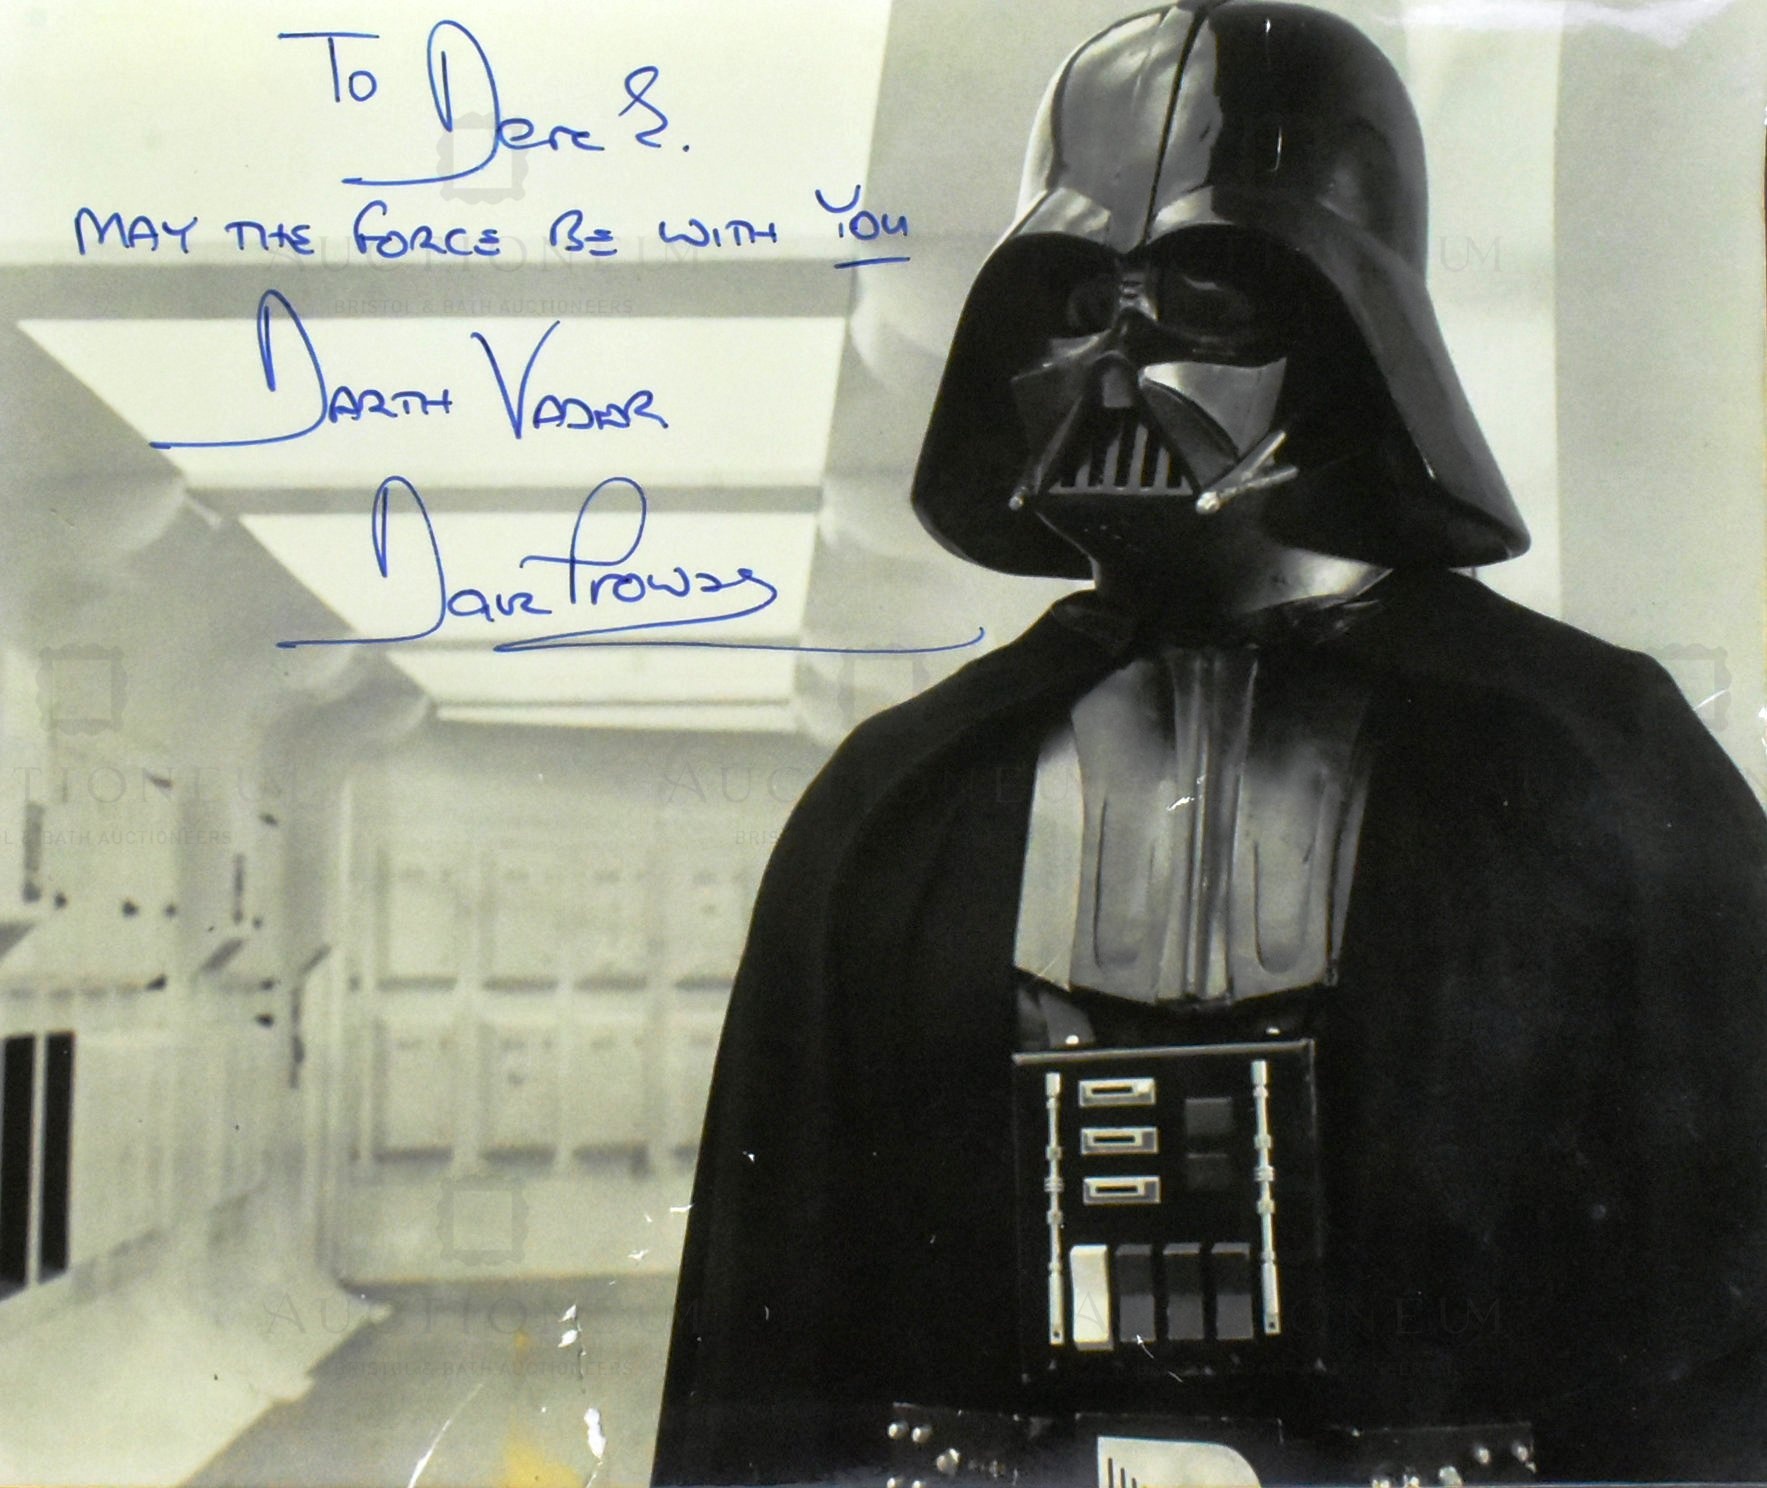 STAR WARS - DAVE PROWSE (D.2020) - AUTOGRAPHED PHOTO TO ASST. DIRECTOR